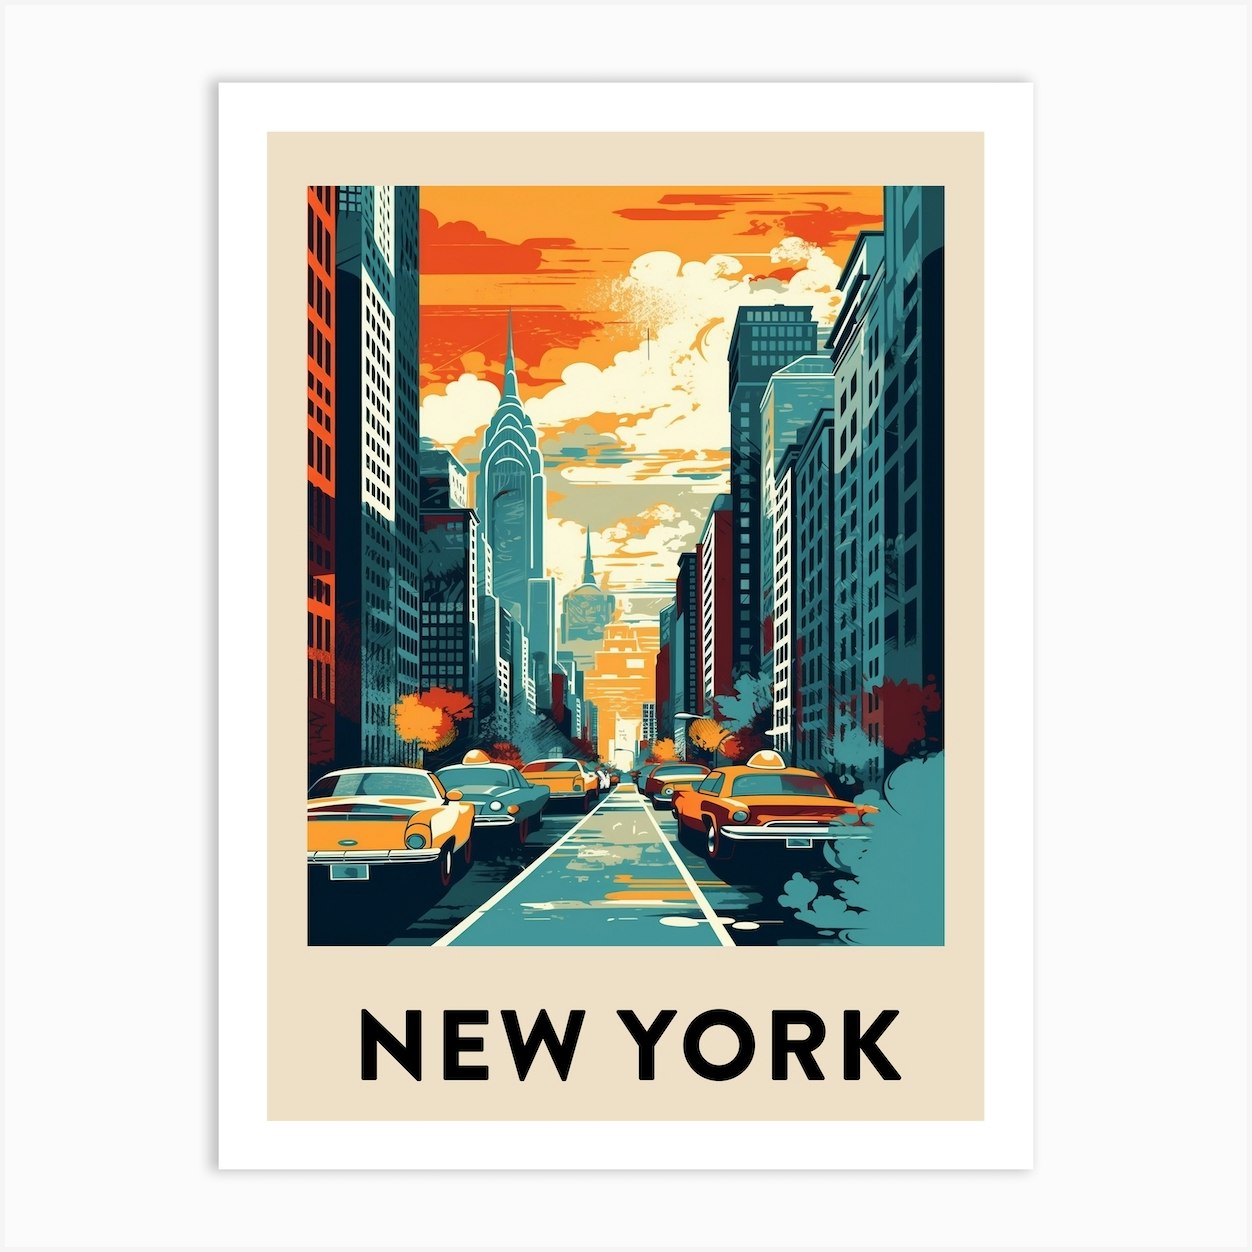 New York Vintage Travel Poster - Retro Travel Poster - Vintage Print Poster  by ArtAndCulture